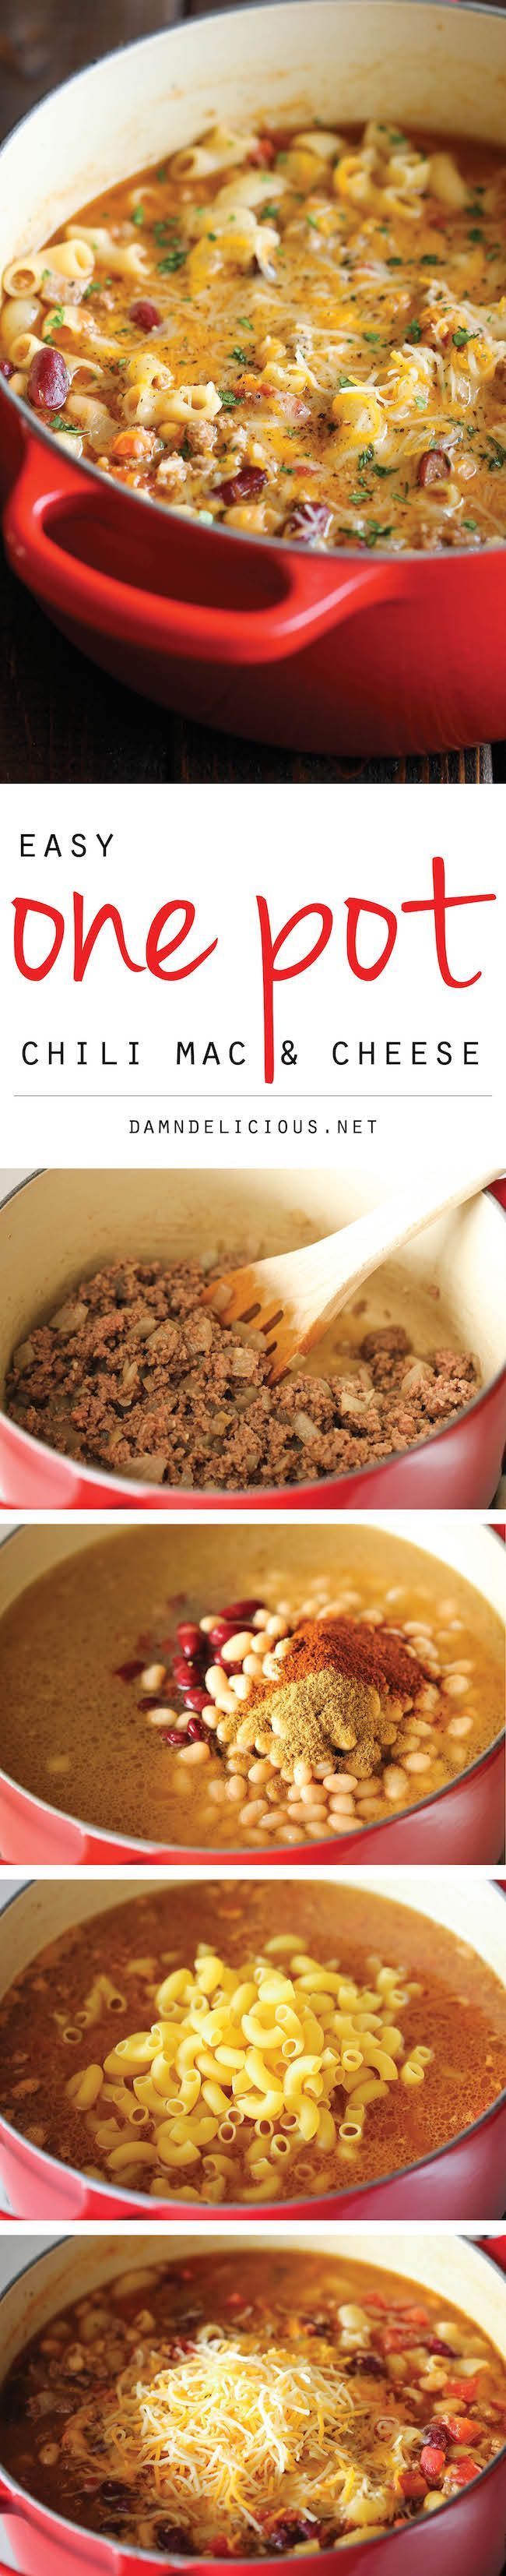 One Pot Chili Mac and Cheese – Two favorite comfort foods come together in this easy, 30 min one-pot meal that the whole family